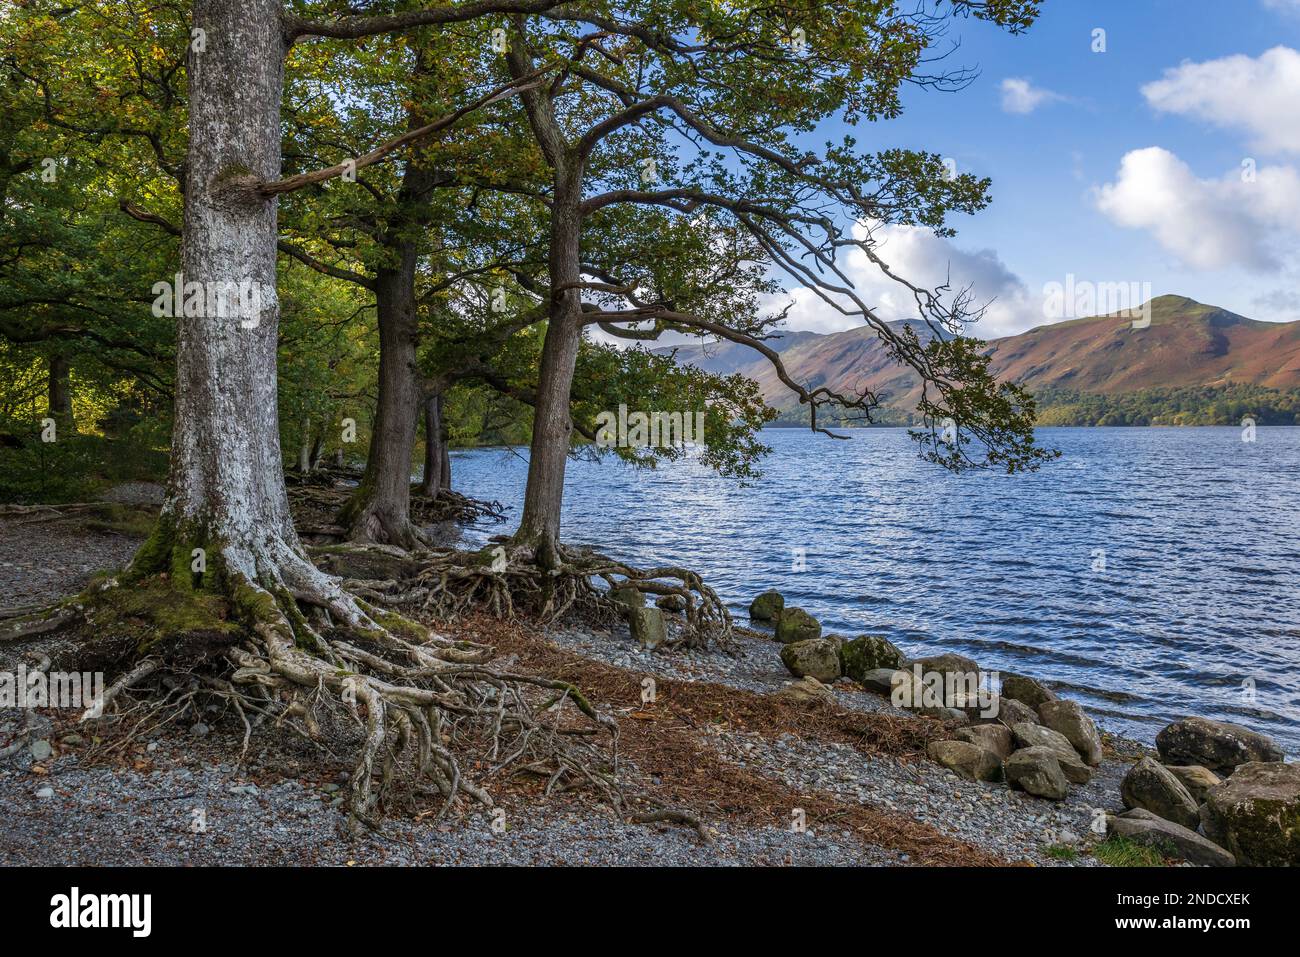 Trees with roots exposed at Derwentwater Lake district uk Stock Photo